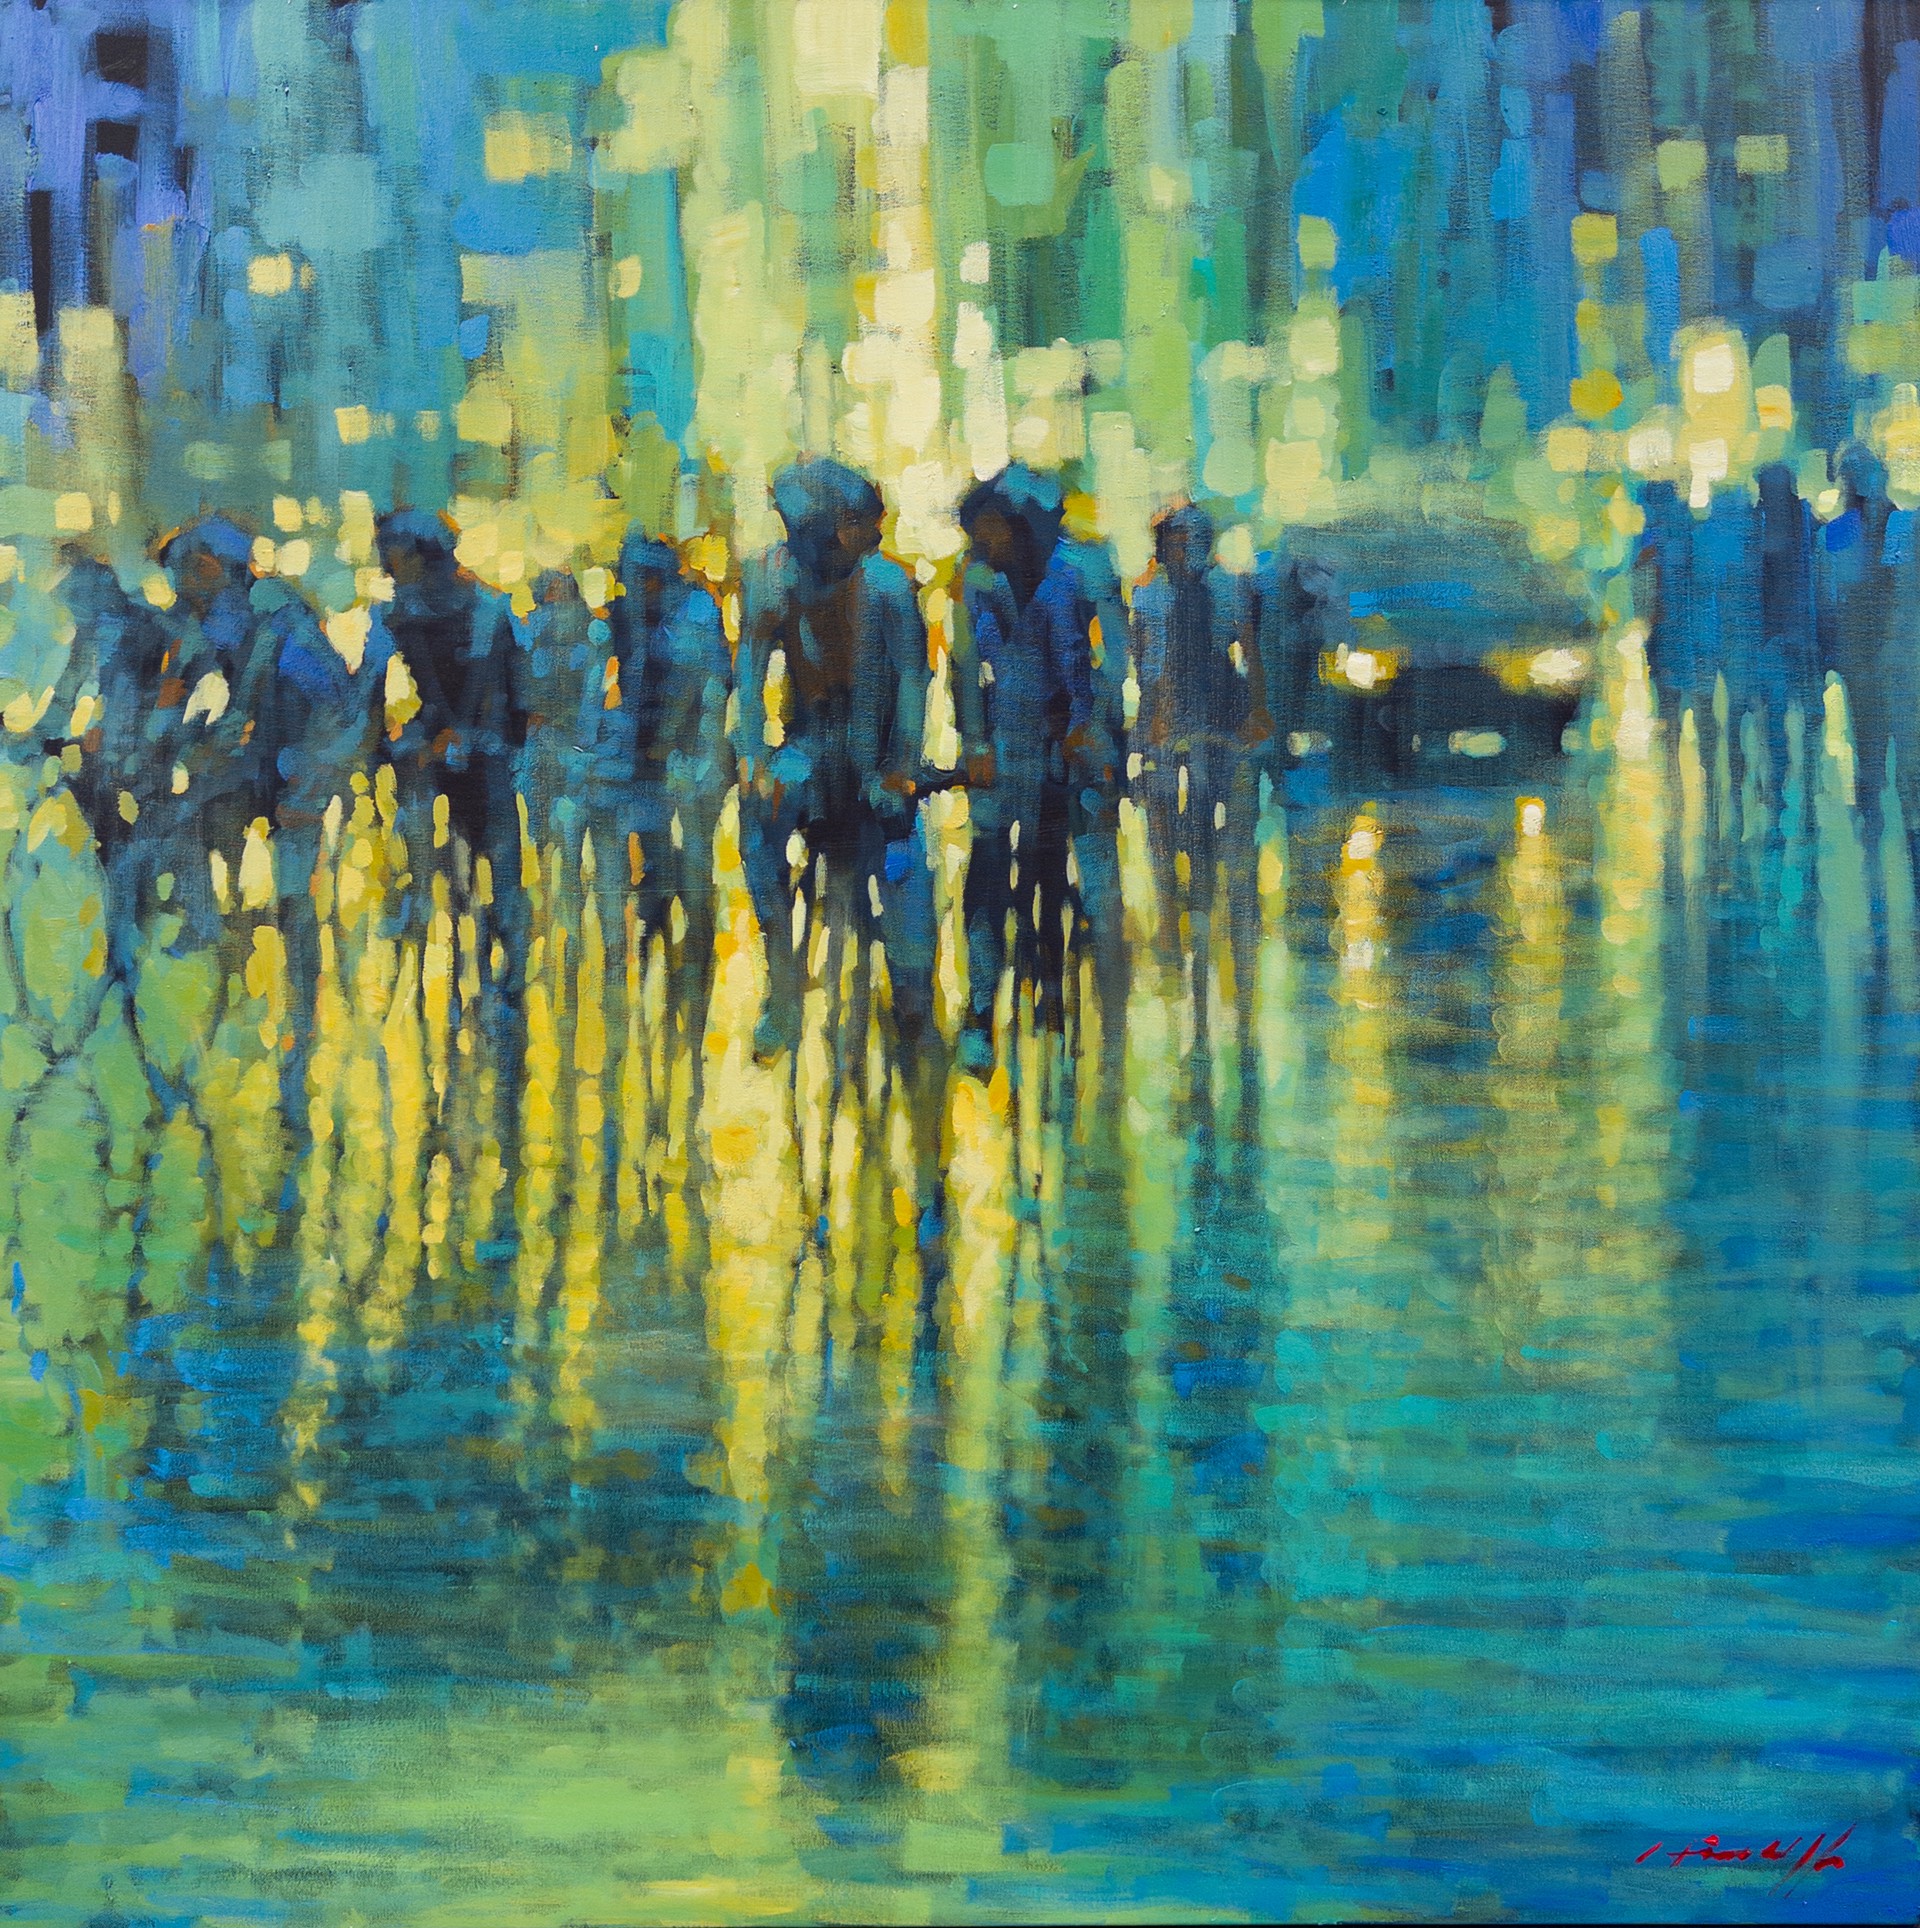 Cyclists in The City by David Hinchliffe